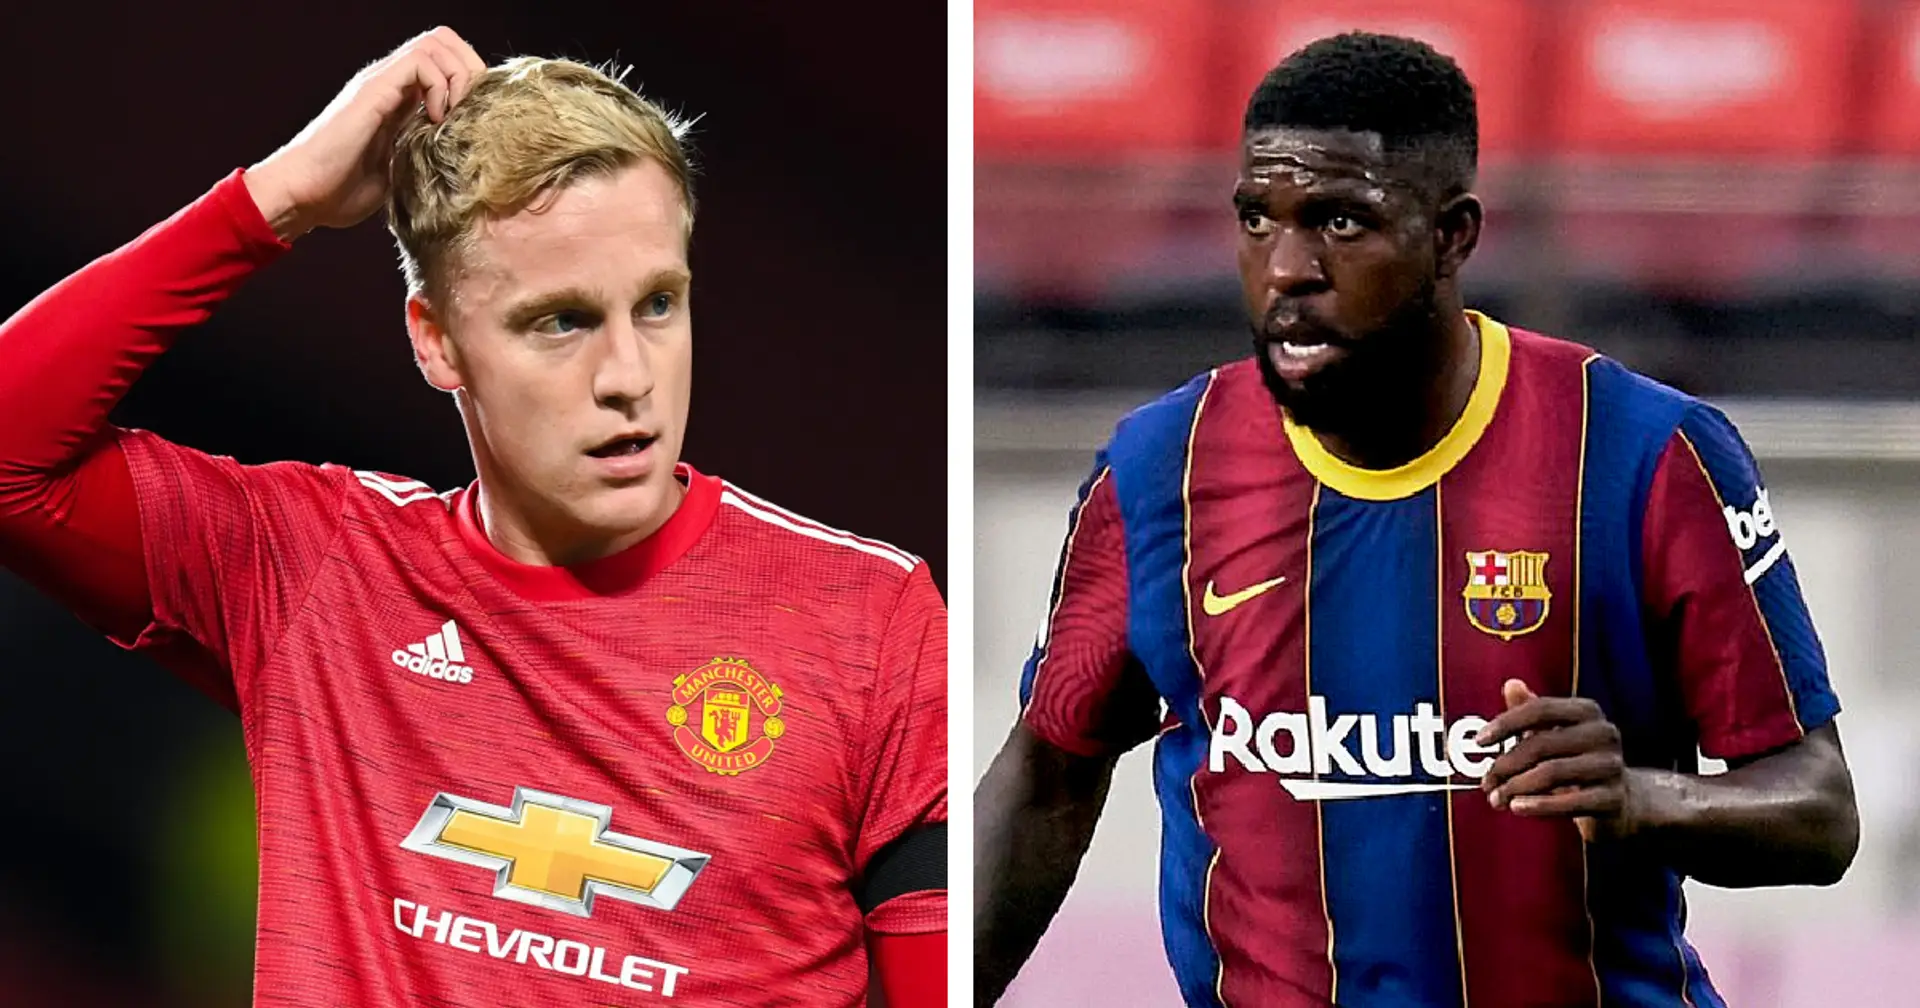 Donny van de Beek to be included in swap deal for Umtiti (reliability: 3 stars)